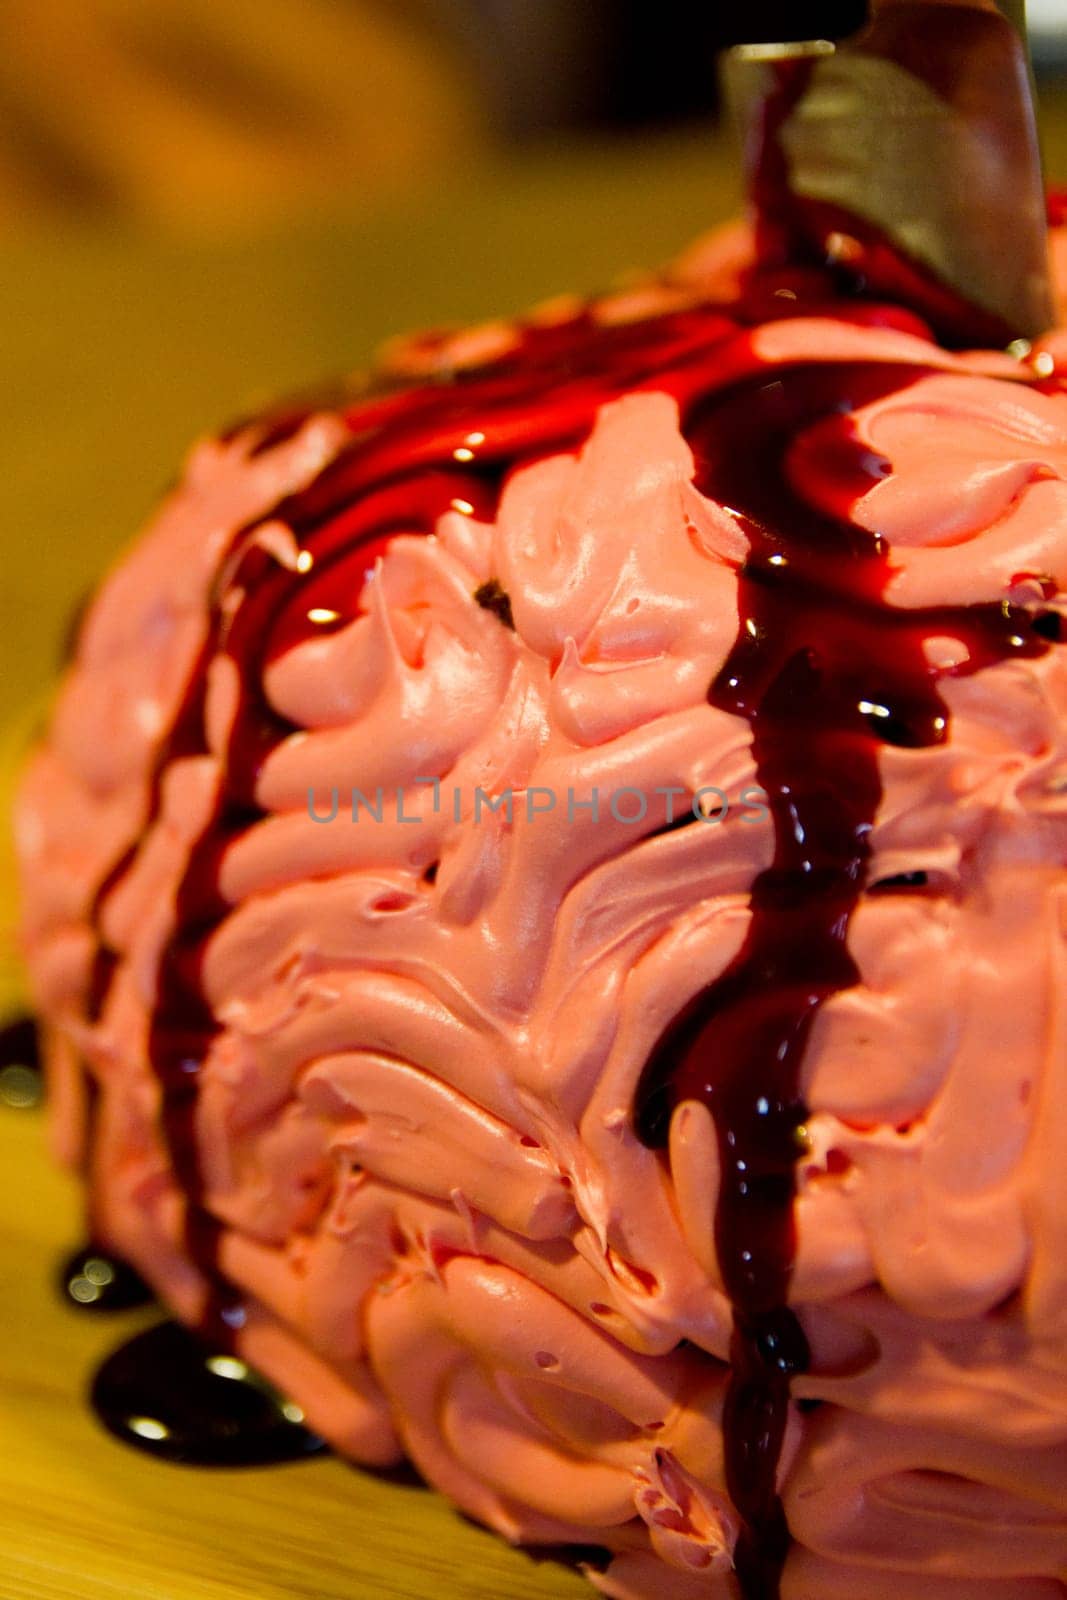 Pink Frosted Brain Cake Dessert with Blood Drizzle in Warm Light Close-Up by njproductions